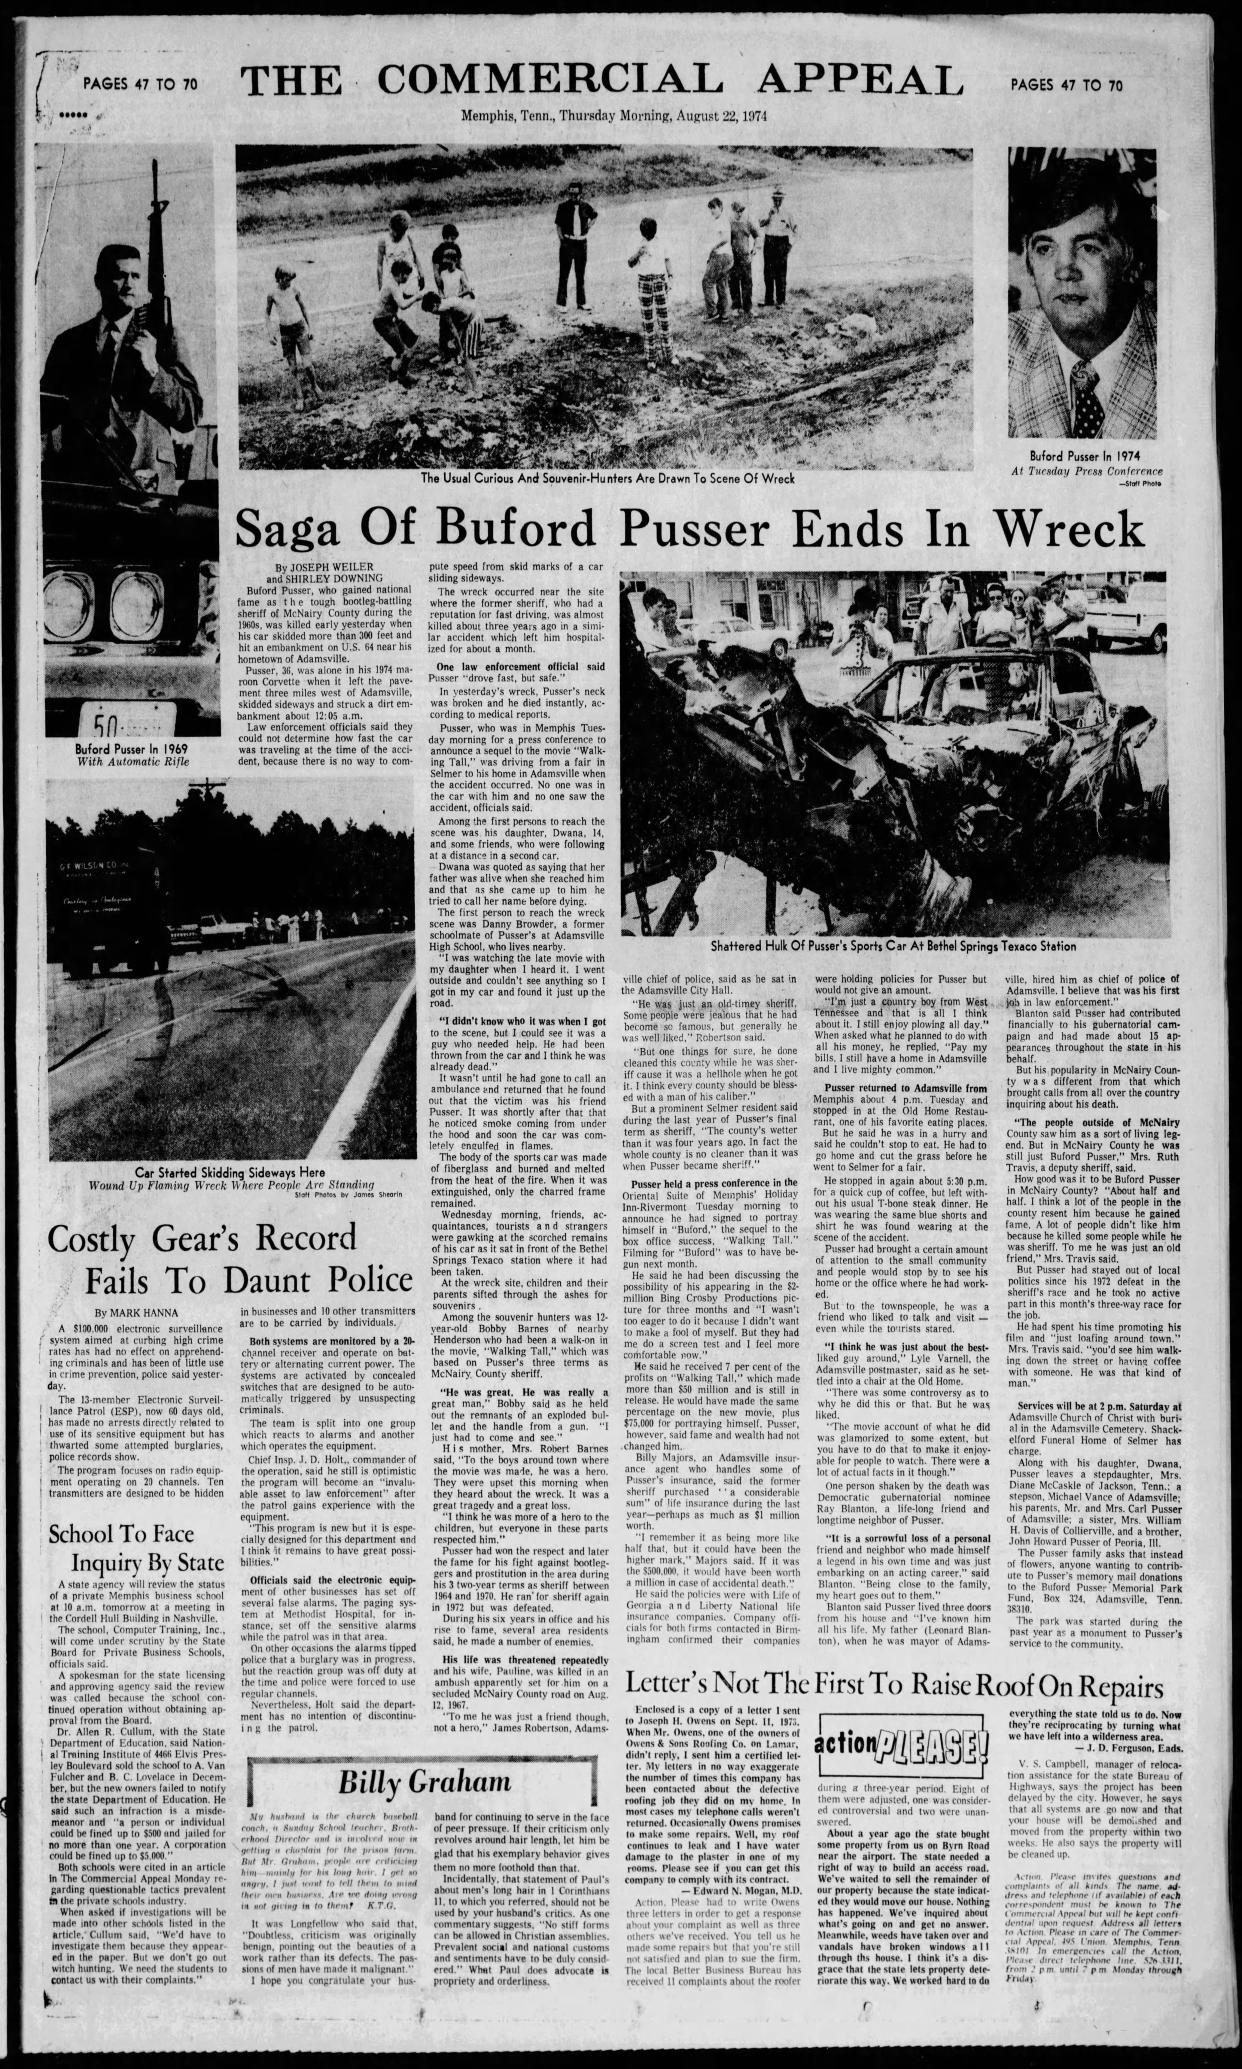 The Commerical Appeal ran a full-page article chronicling McNairy County Sheriff Buford Pusser's life after he was killed in a car crash in August 1974.